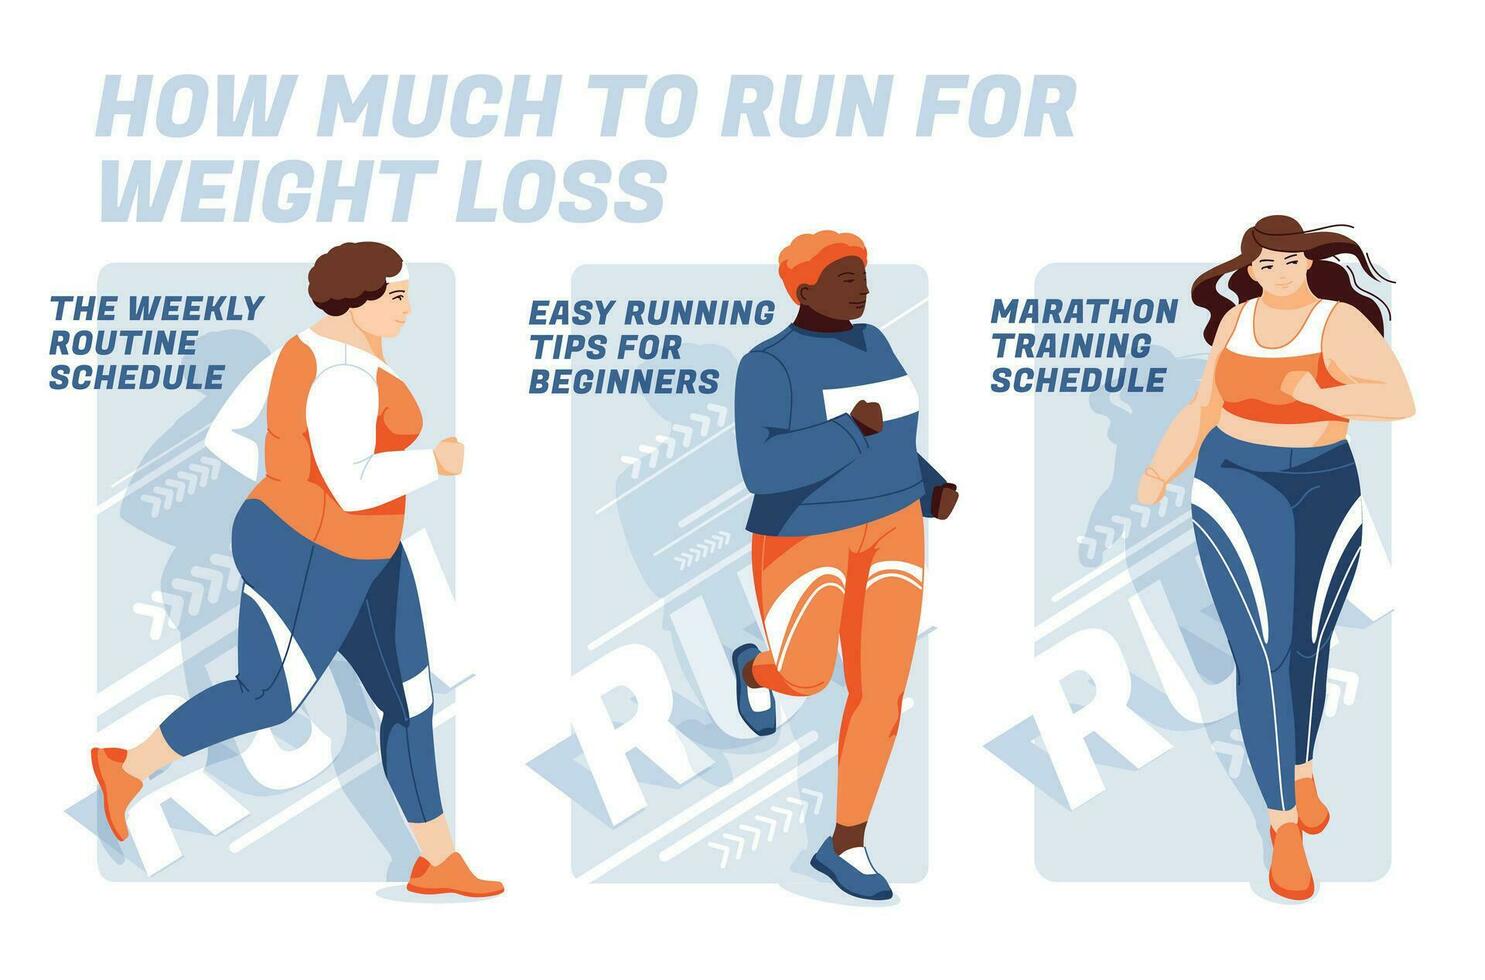 3 banner designs to advertise running competition for weight loss or training. Three overweight sportswomen run on an abstract background. Design for presentations, print, web advertising banners. vector